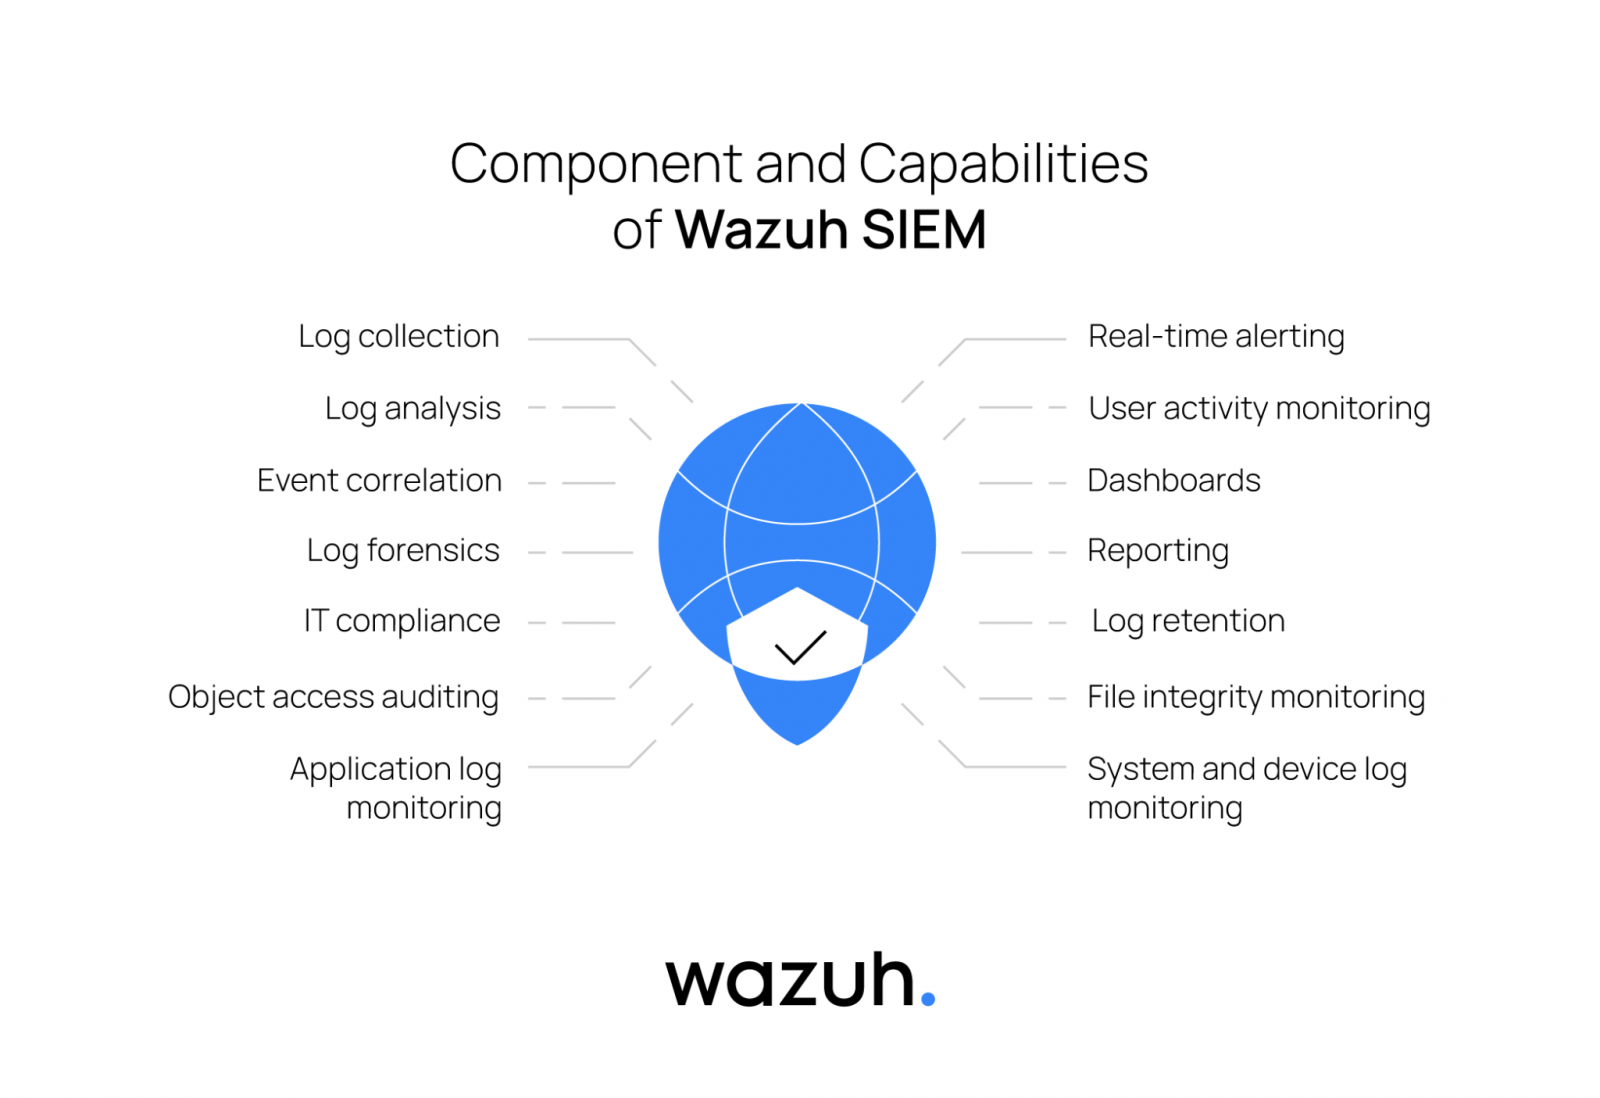 Components and capabilities of Wazuh